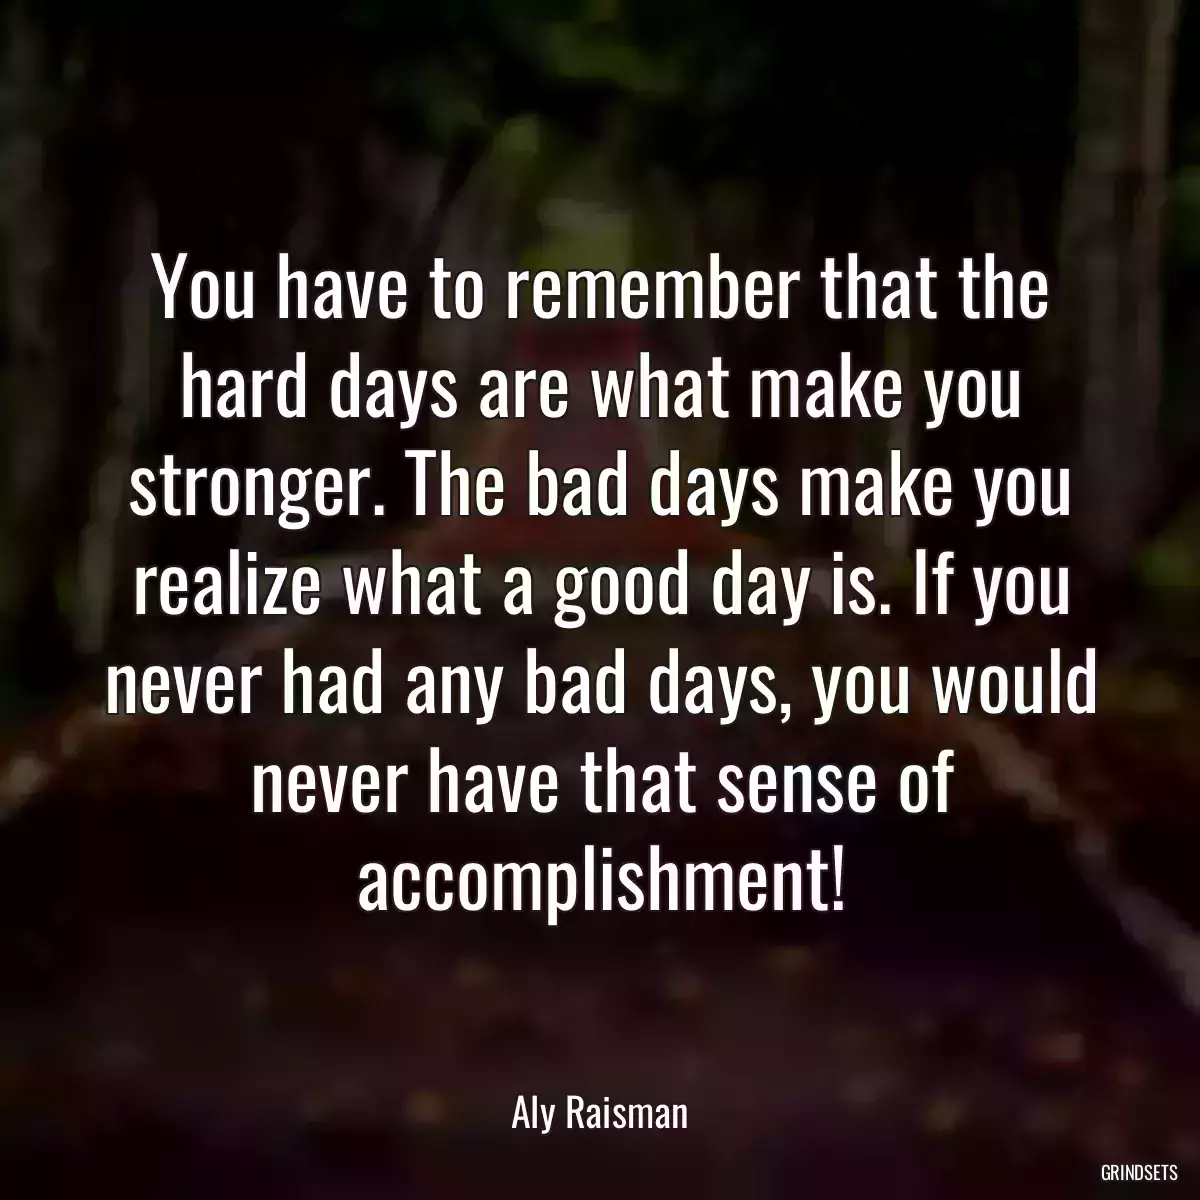 You have to remember that the hard days are what make you stronger. The bad days make you realize what a good day is. If you never had any bad days, you would never have that sense of accomplishment!